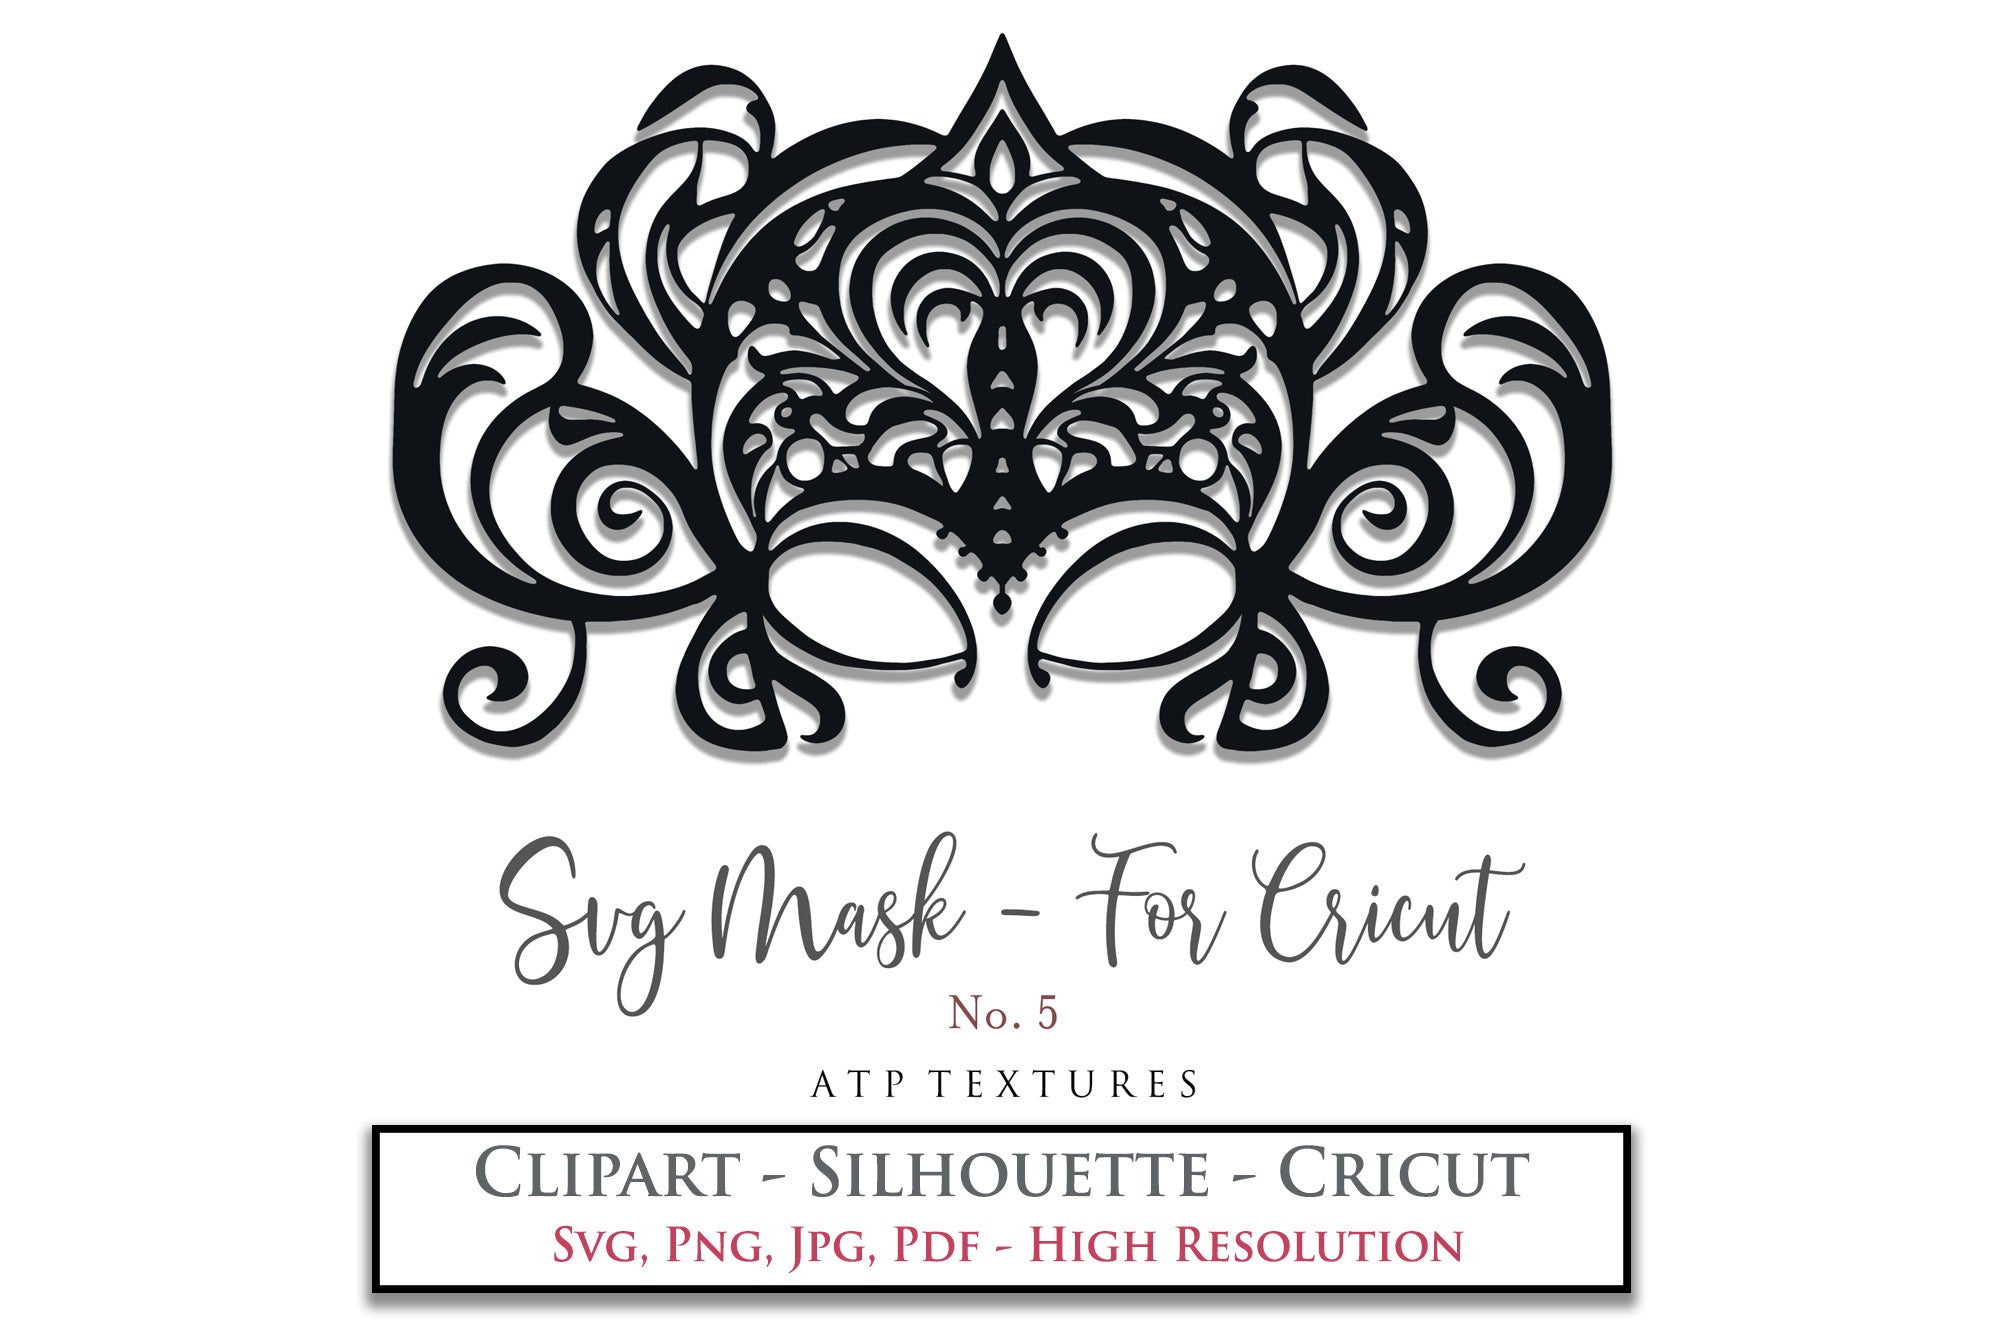 SVG Masquerade Mask Clipart For Cricut , Silhouette or any other cutting machine that accepts the files provided in this set. Clipart for your next art project or even for print! SVG, PNG, PDF, JPG. This clipart is In high resolution. 